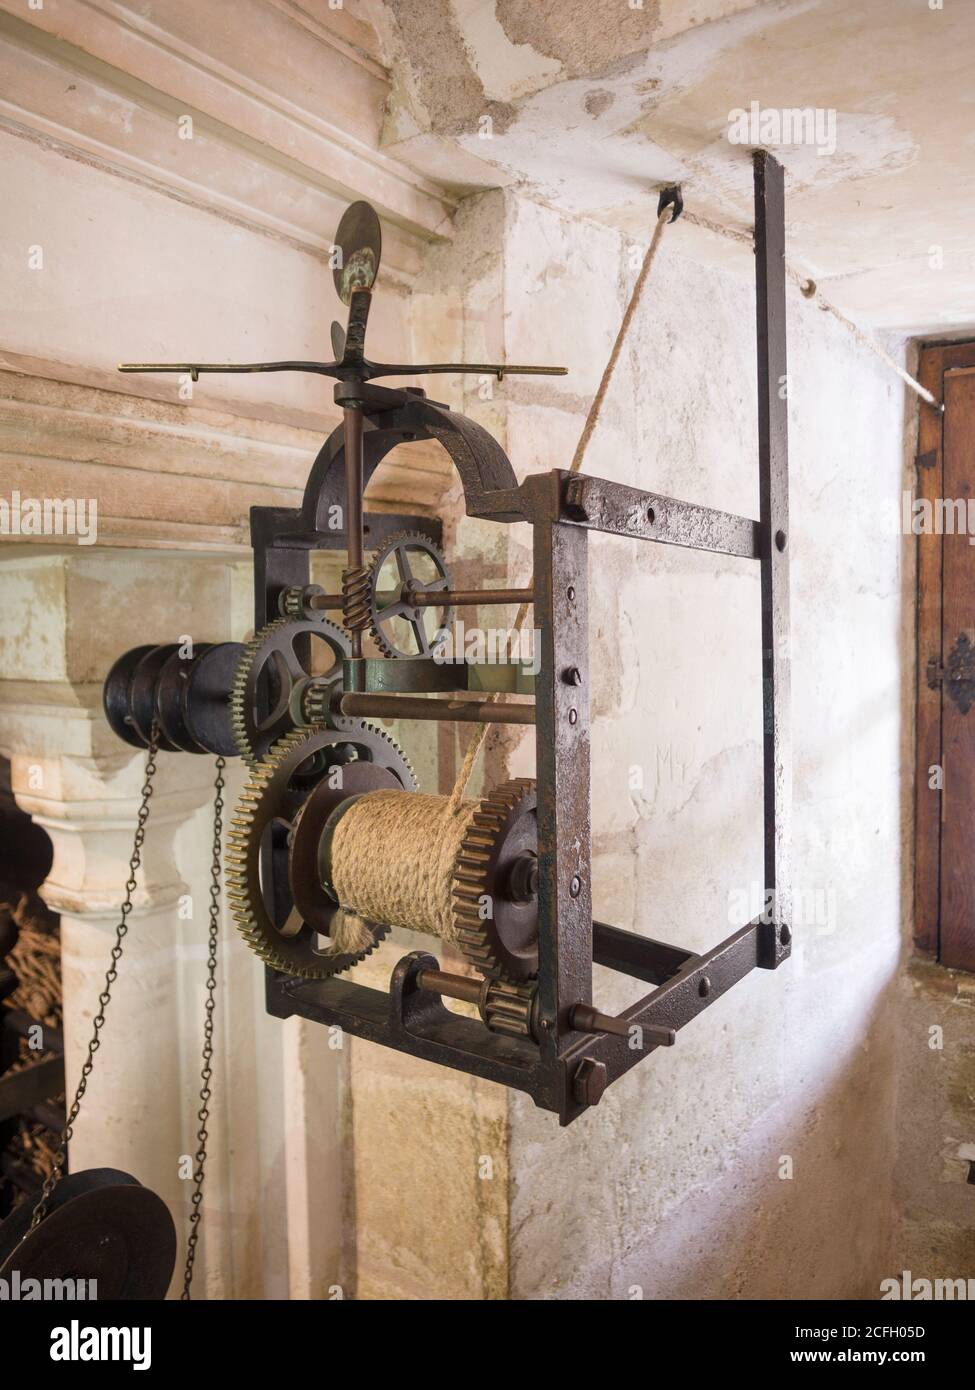 River Hoist: The complex drive mechanism of the machine used to hoist water and supplies from the river below the kitchens in the chateau. Stock Photo